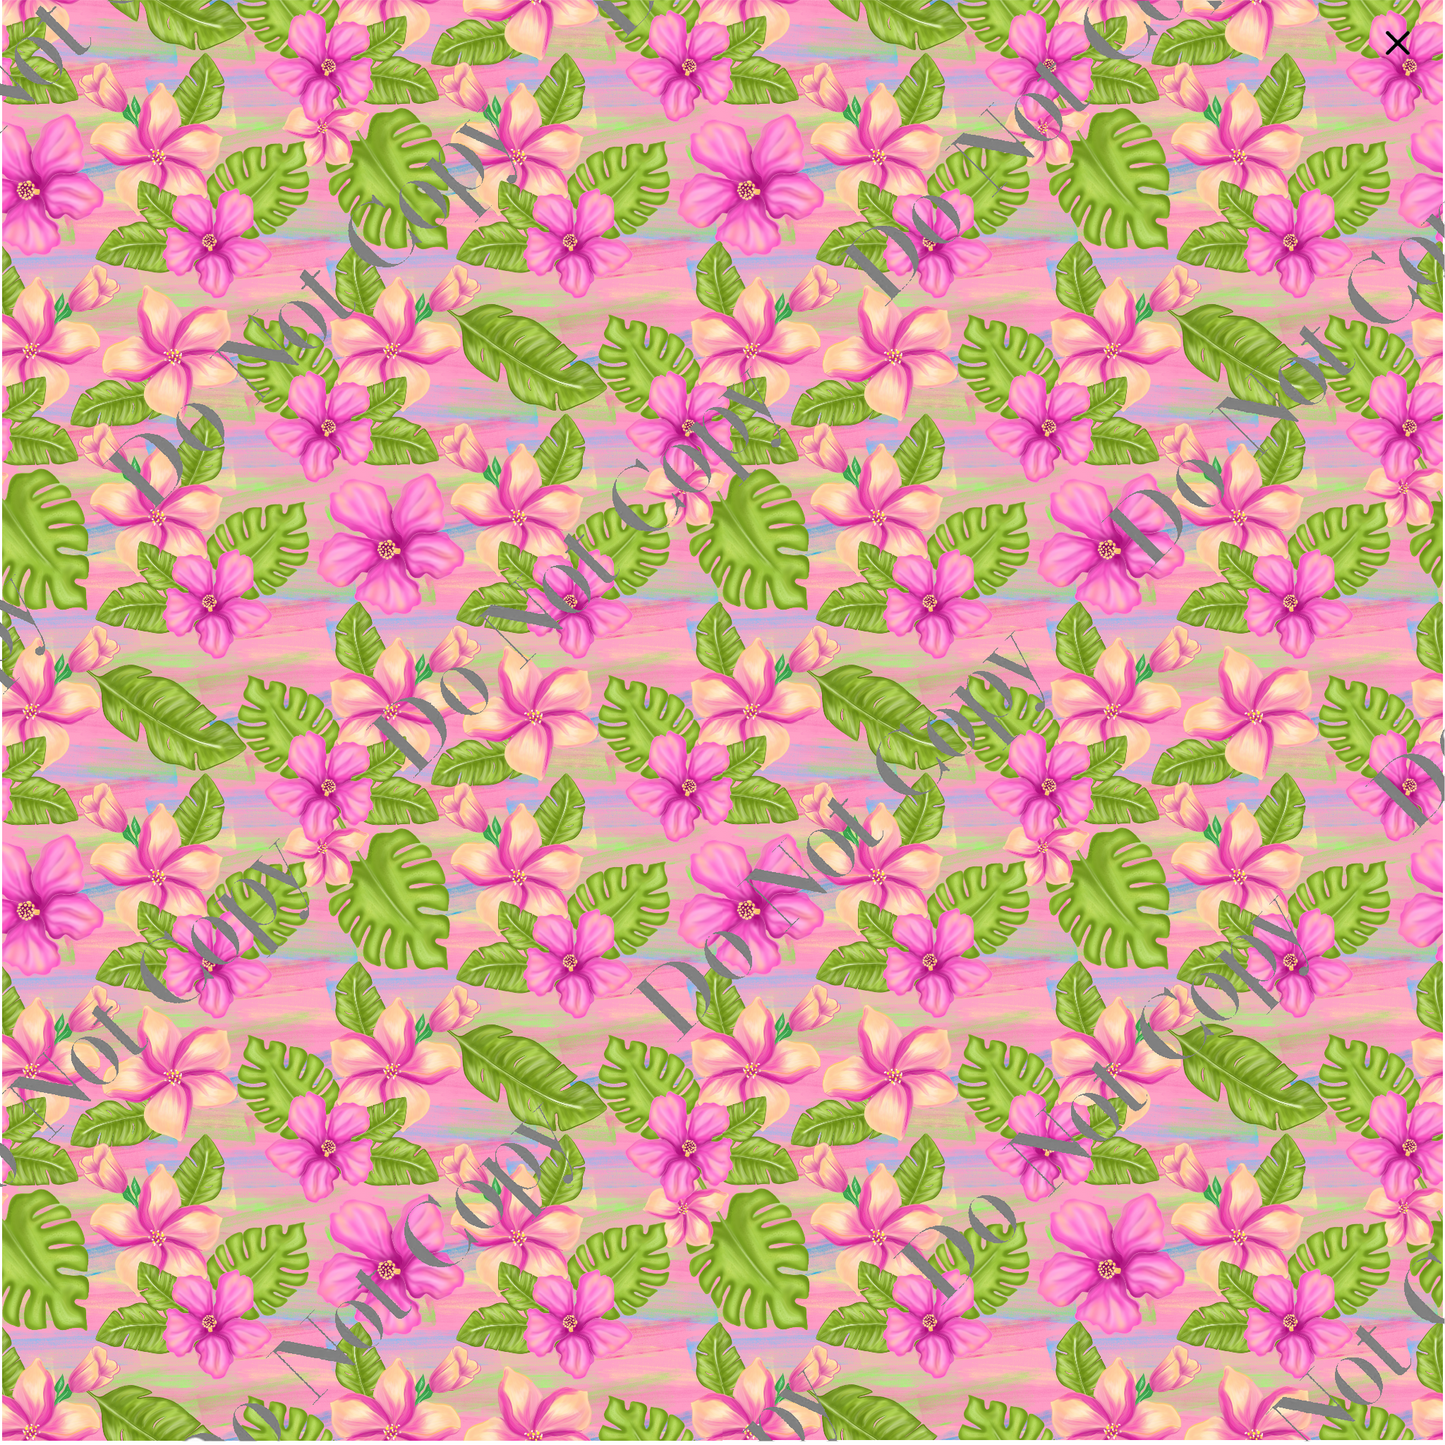 Patterned Vinyl - Tropical Flowers with painted background